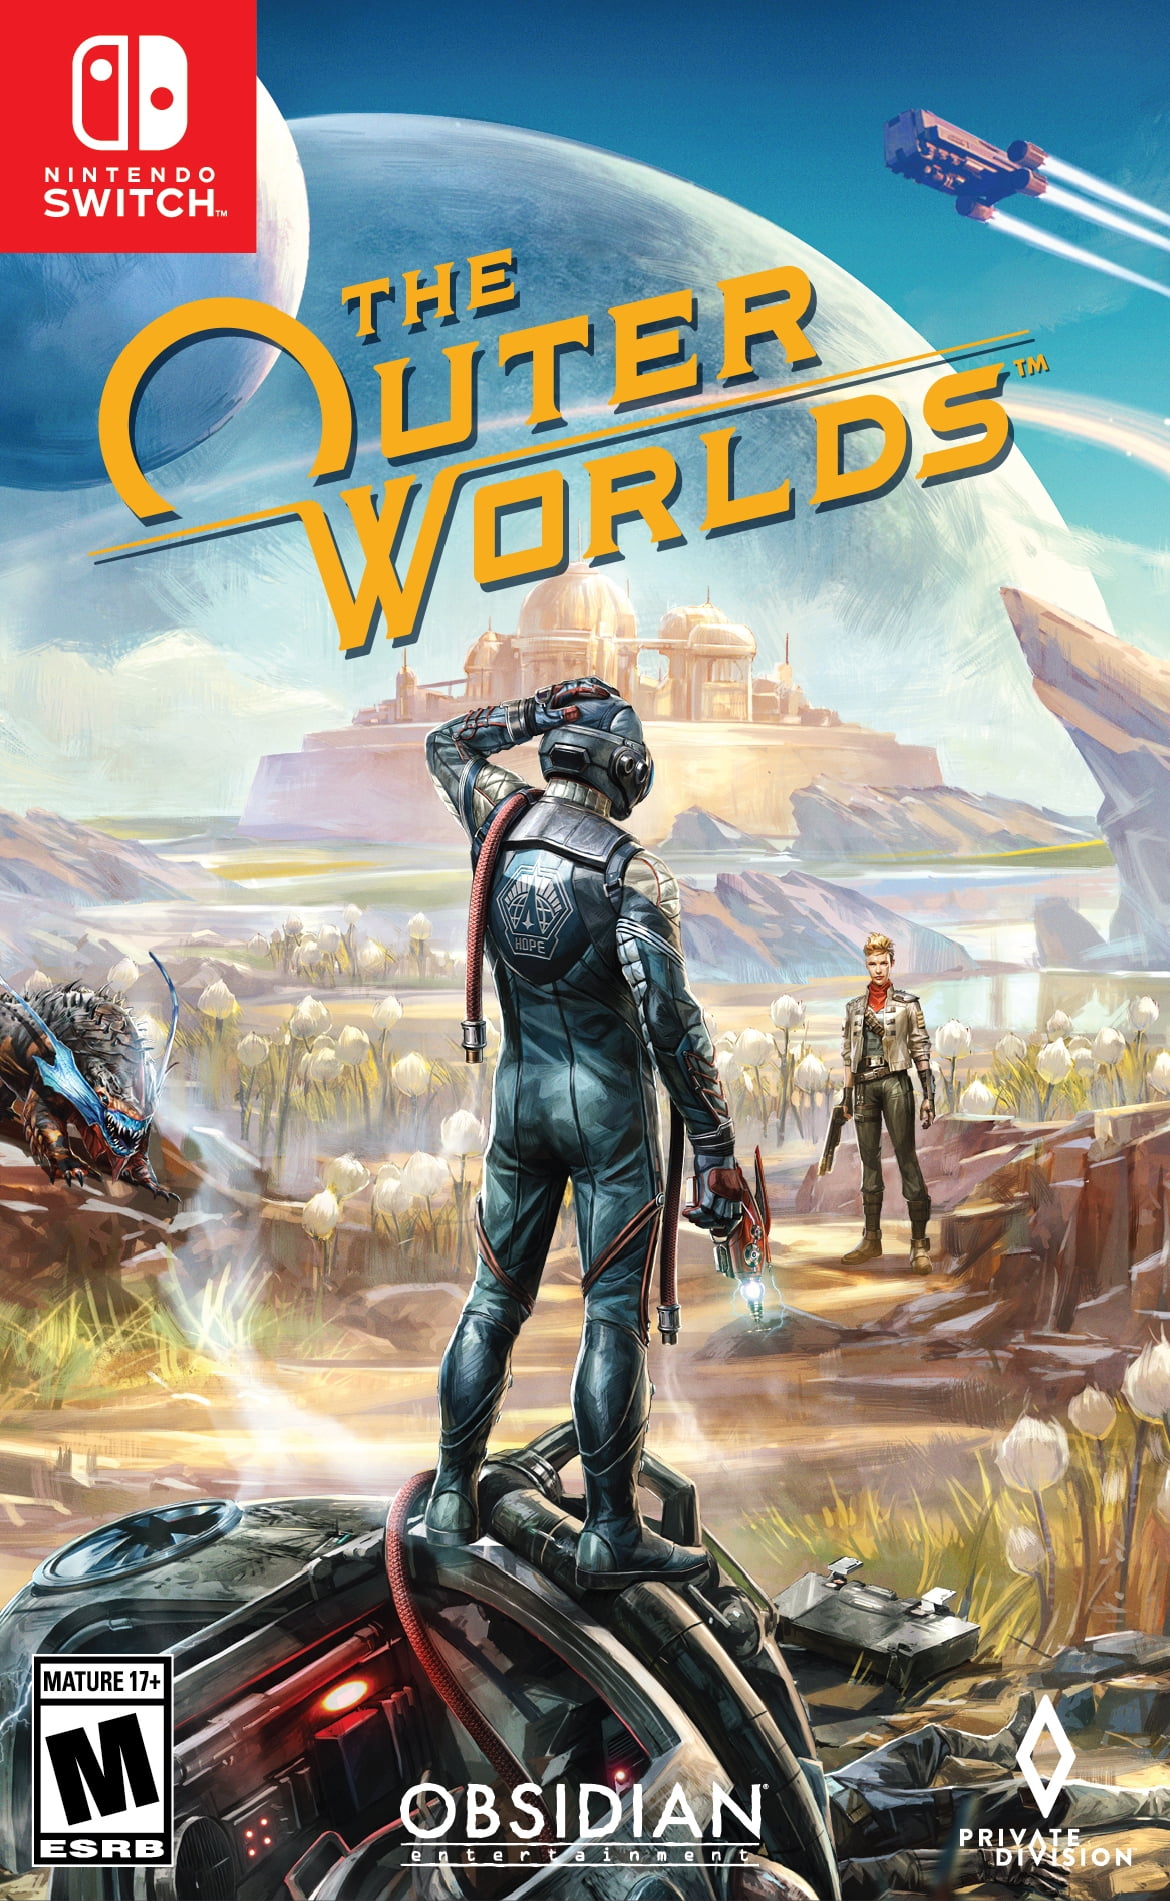 Compre The Outer Worlds para PC, PS4™, Xbox, Switch, Loja oficial